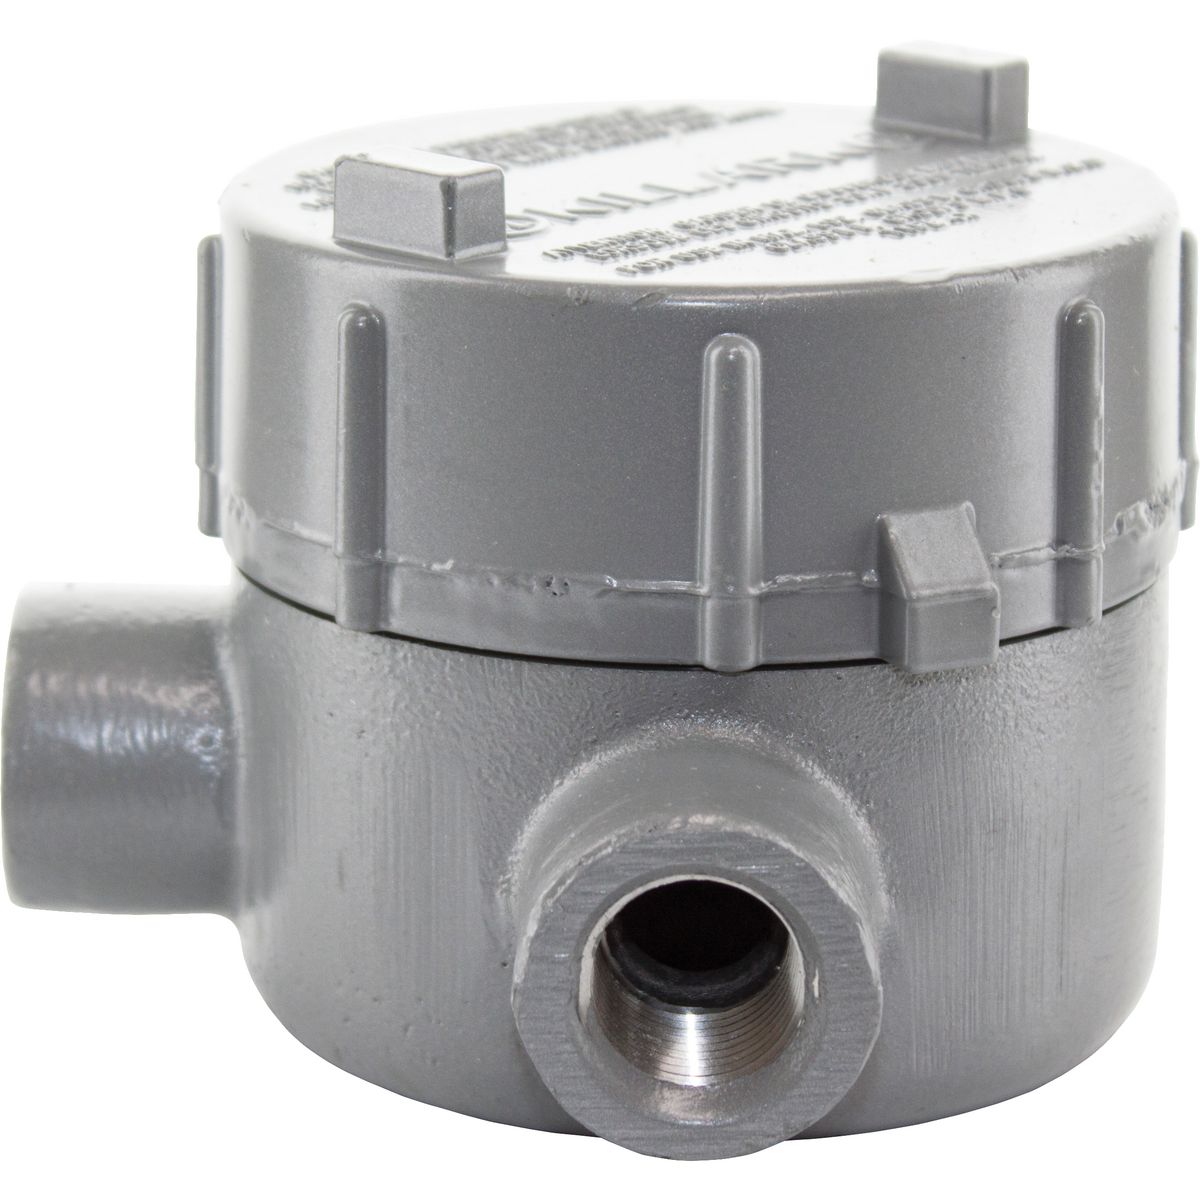 GEC SERIES FITTINGS - ALUMINUM - L TYPE OUTLET BODY - HUB SIZE 3/4 IN -VOLUME 18.0 CU IN